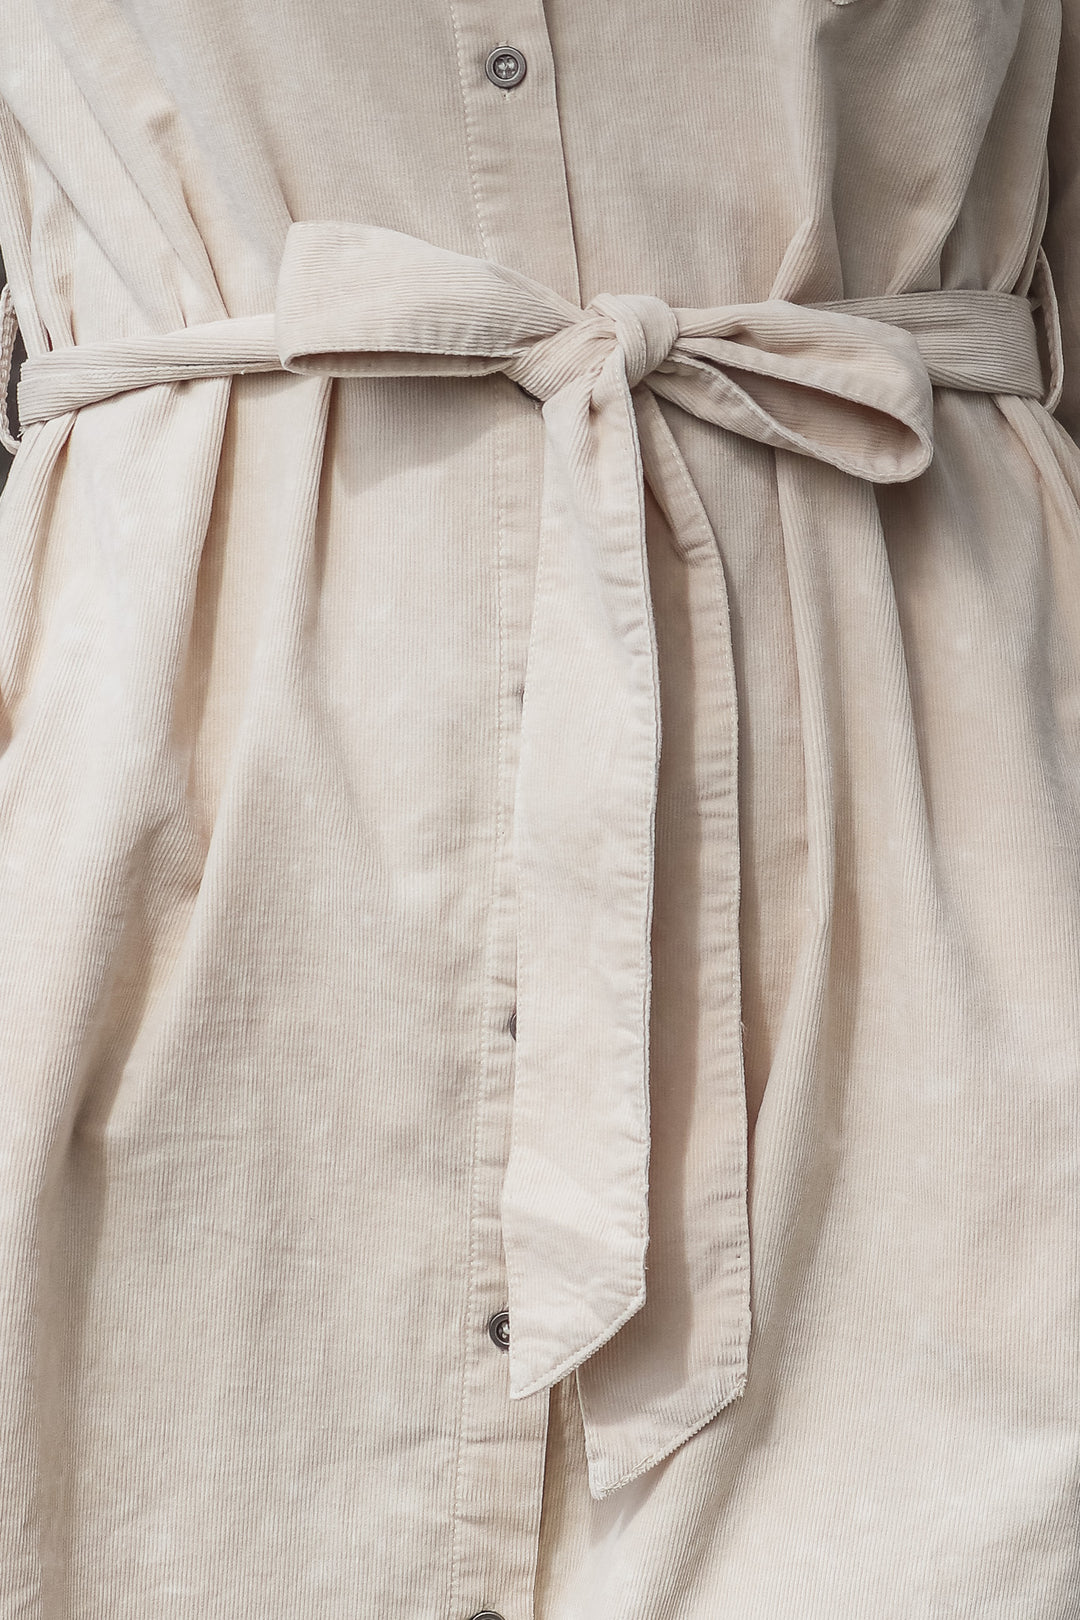 A closeup of the tie belt tied in a bow on a tan corduroy shirt dress.